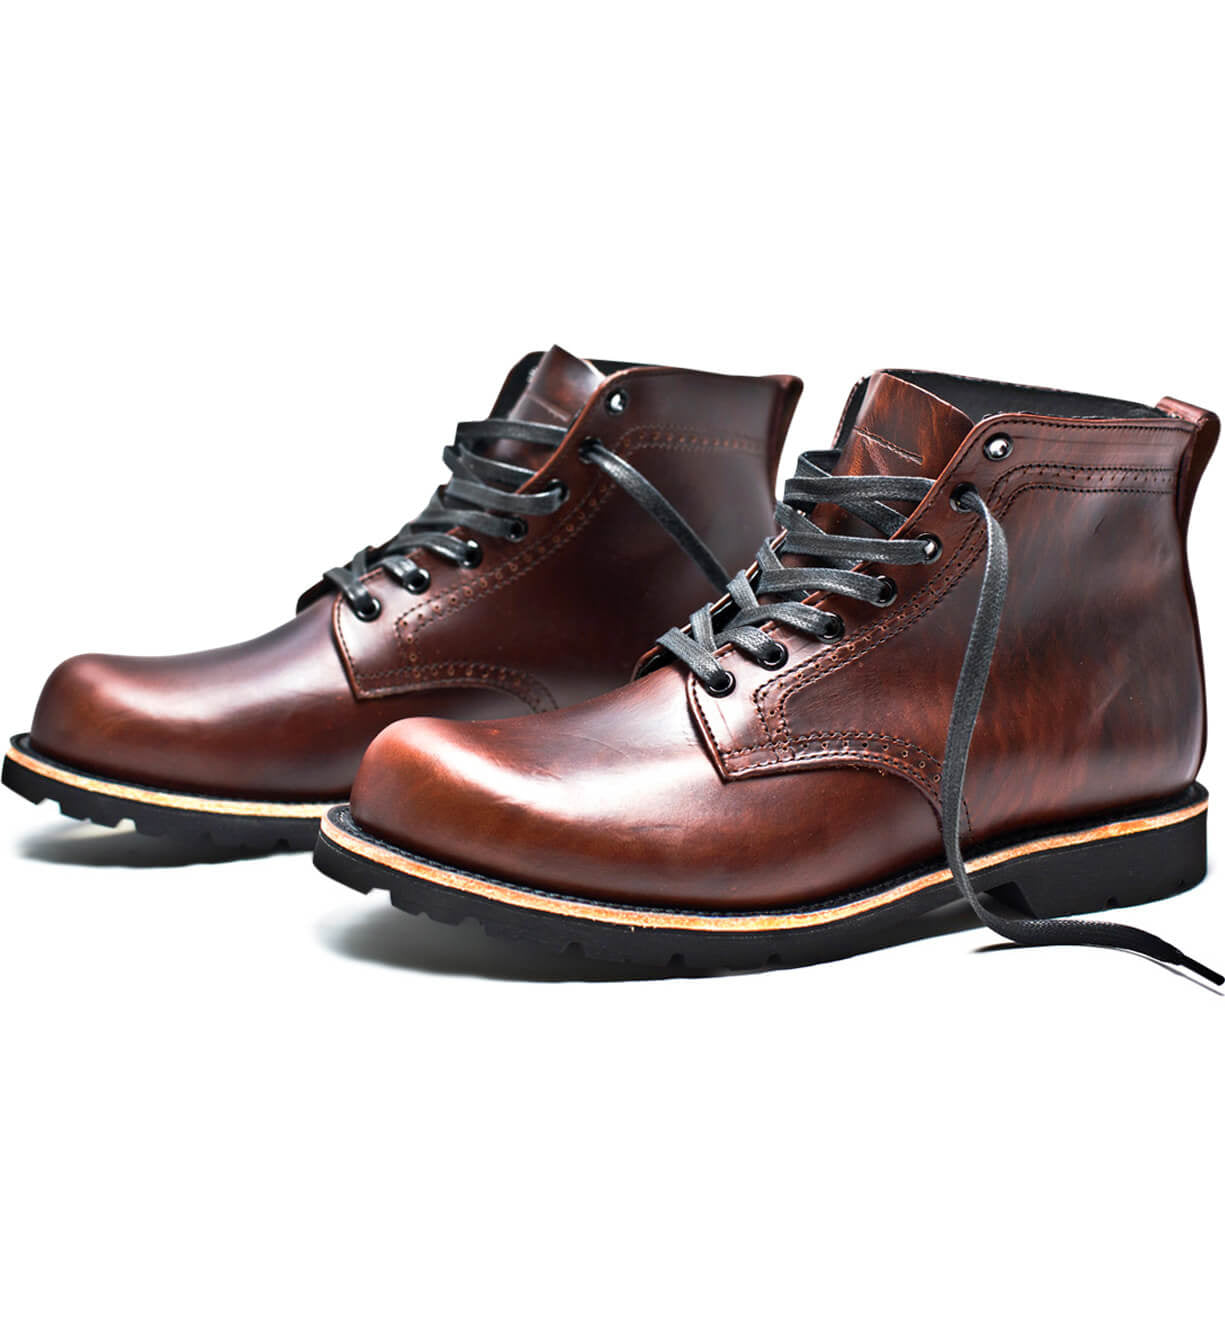 A pair of Tydus boots by Broken Homme with a rugged outsole on a white background.